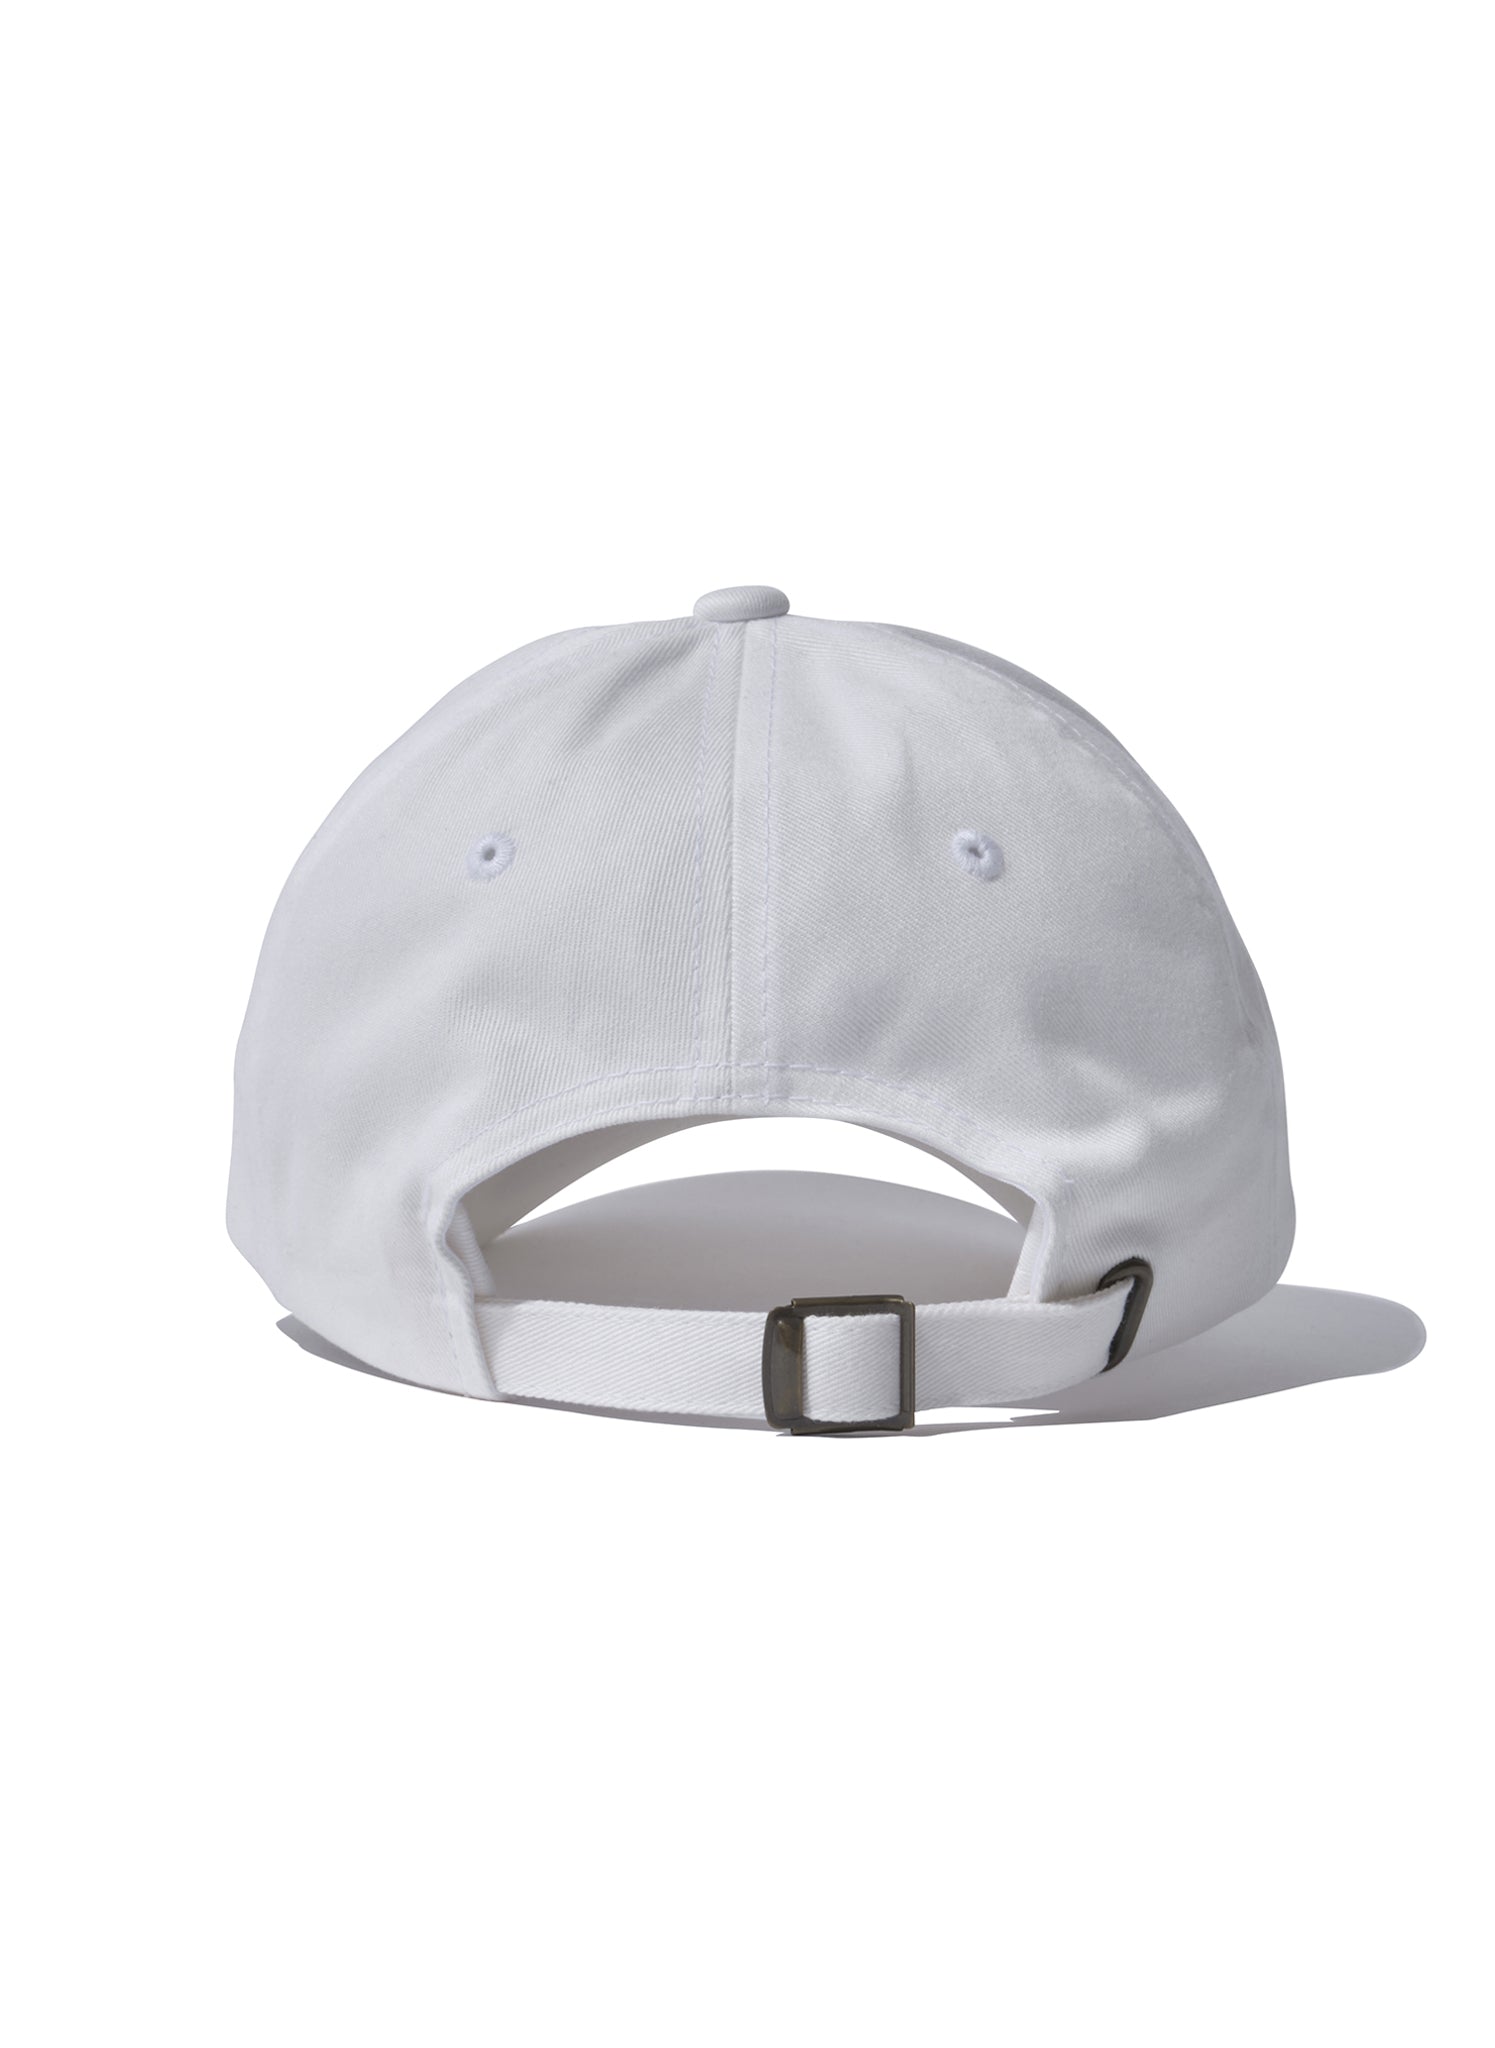 <span style="color: #f50b0b;">Last One</span> WILLY CHAVARRIA / WILLY CAP 2 WHITE